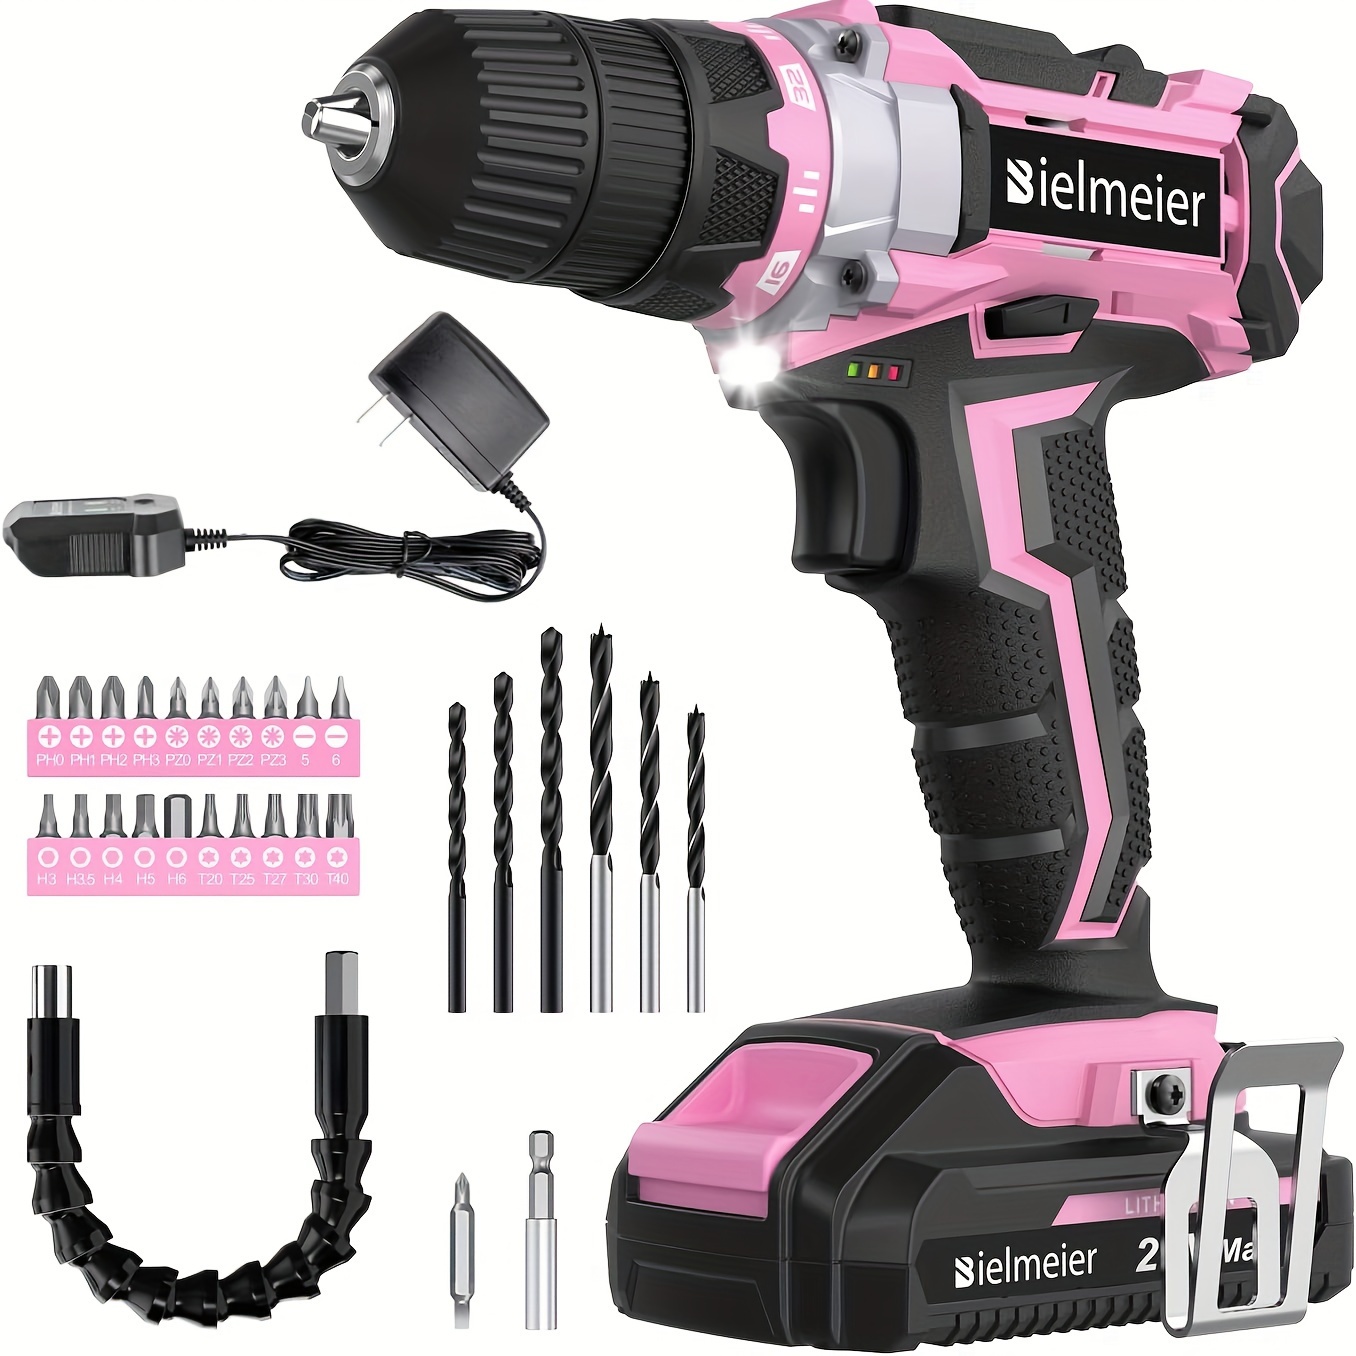 

Bielmeier 20v Pink Cordless Drill Set, Power Drill Kit With Lithium-ion And Charger, 3/8 Inches Keyless Chuck, Electric Drill With Variable Speed, Led And 29pcs Drill, For Home Diy And Repair